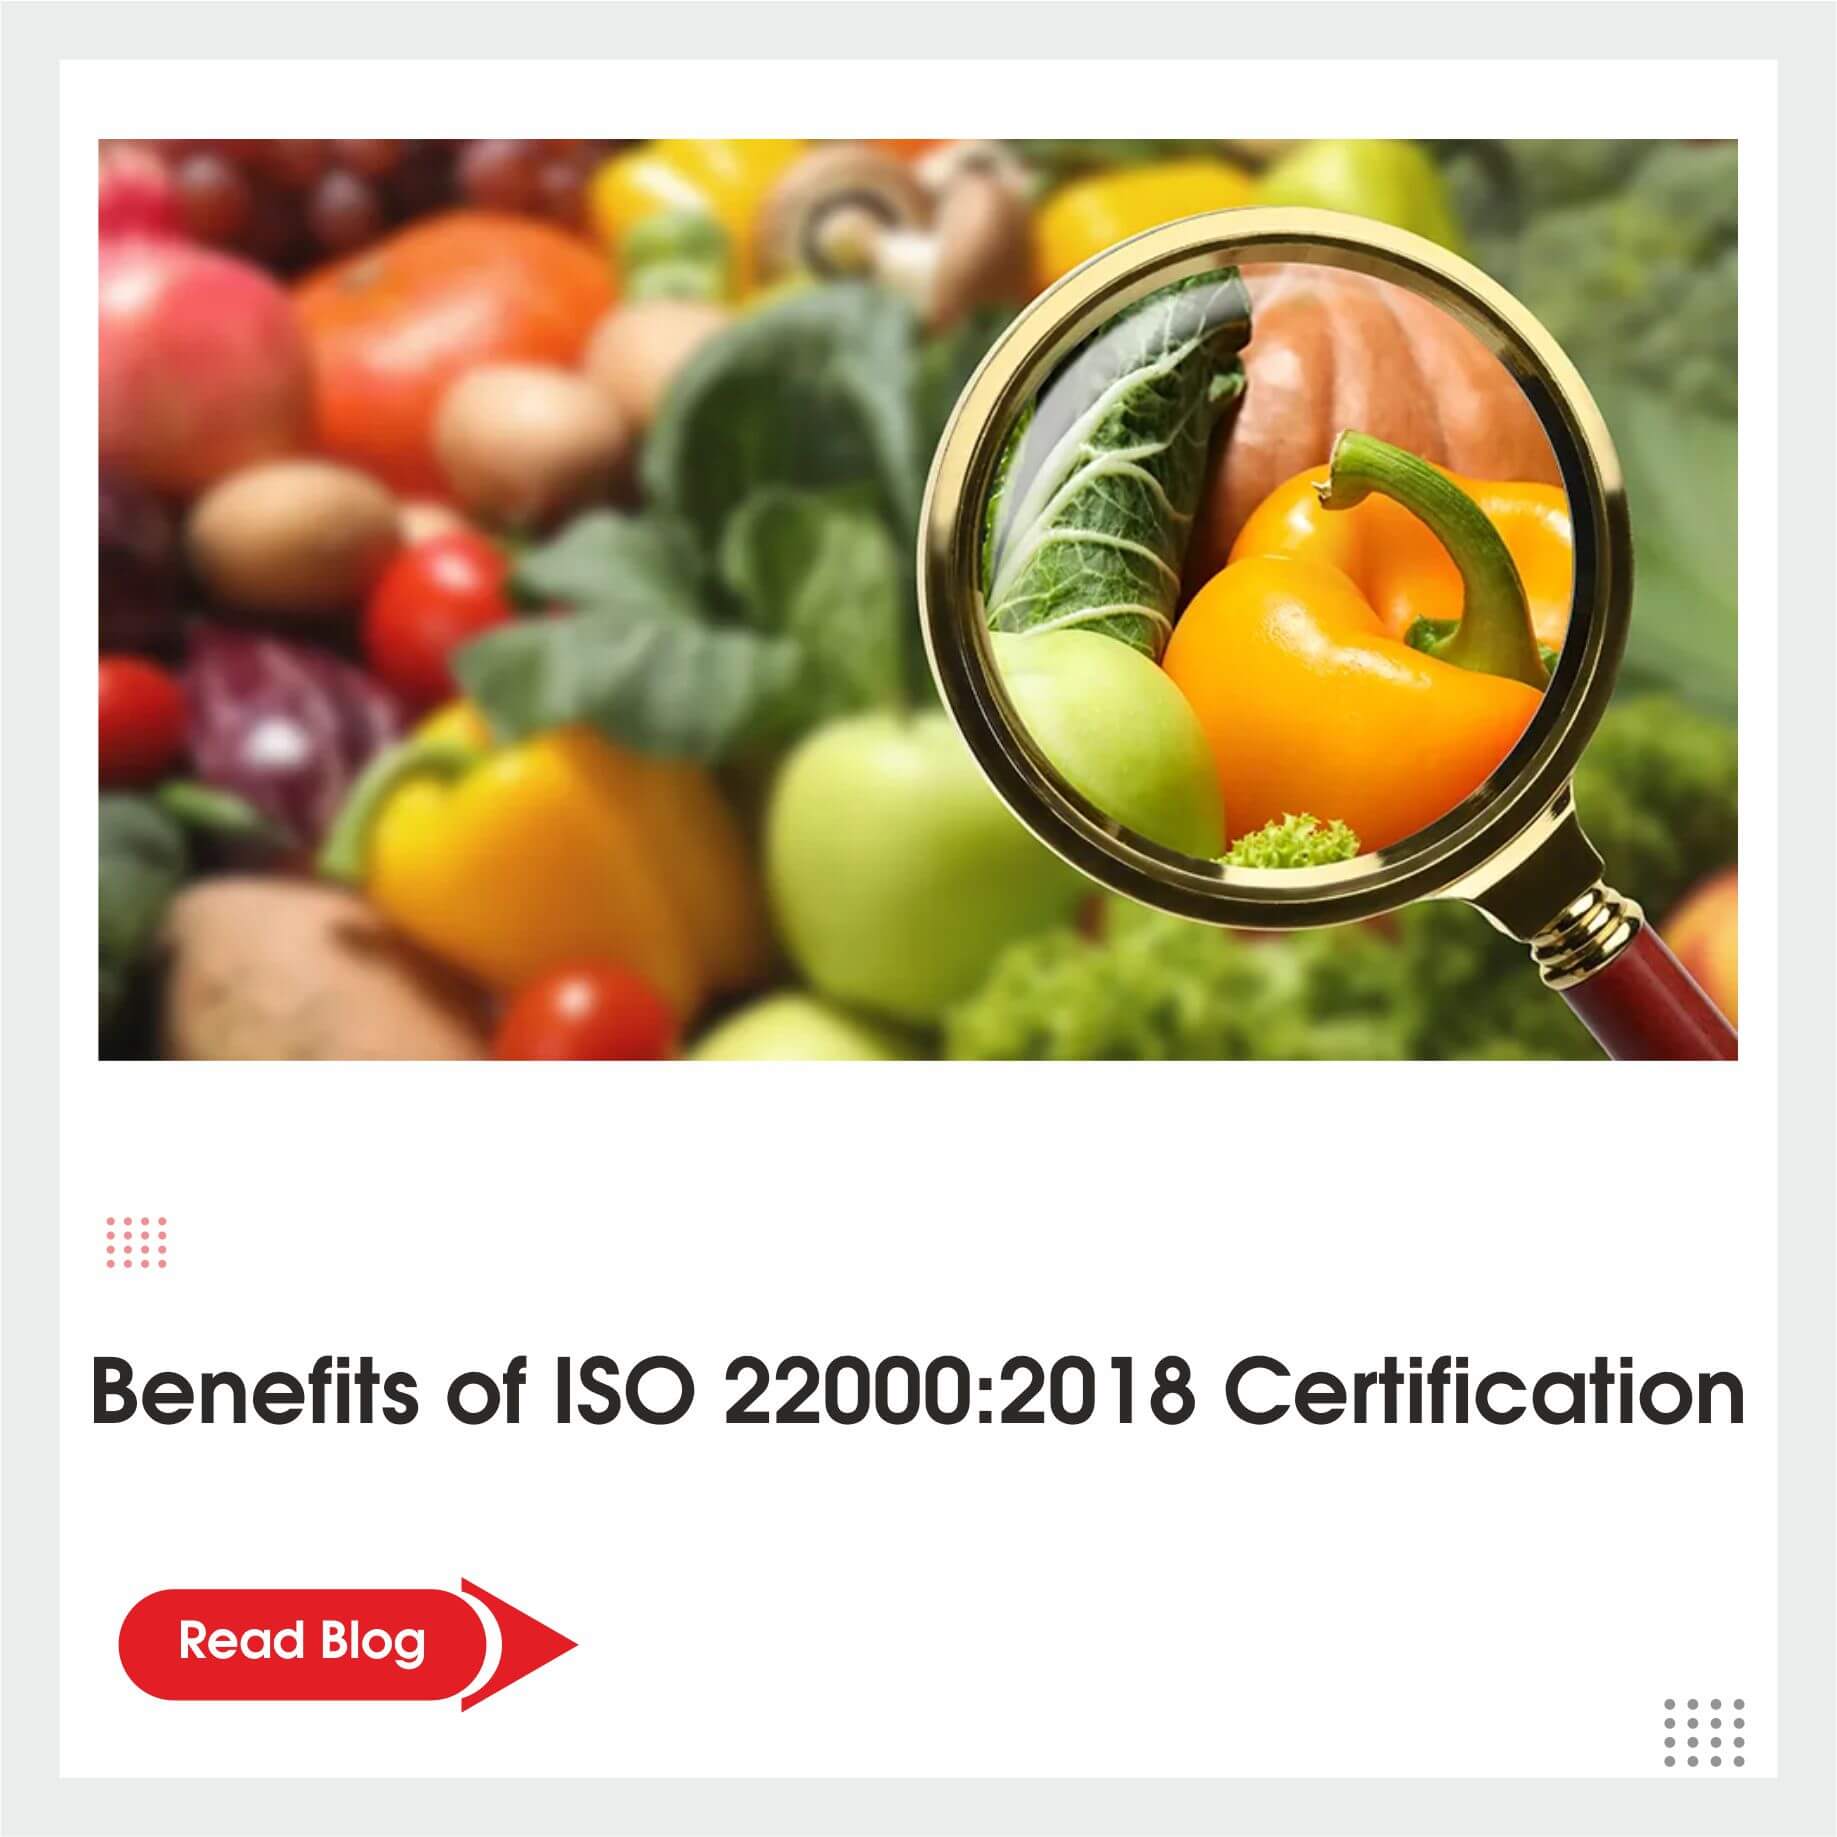 Benefits of ISO 22000:2018 Certification